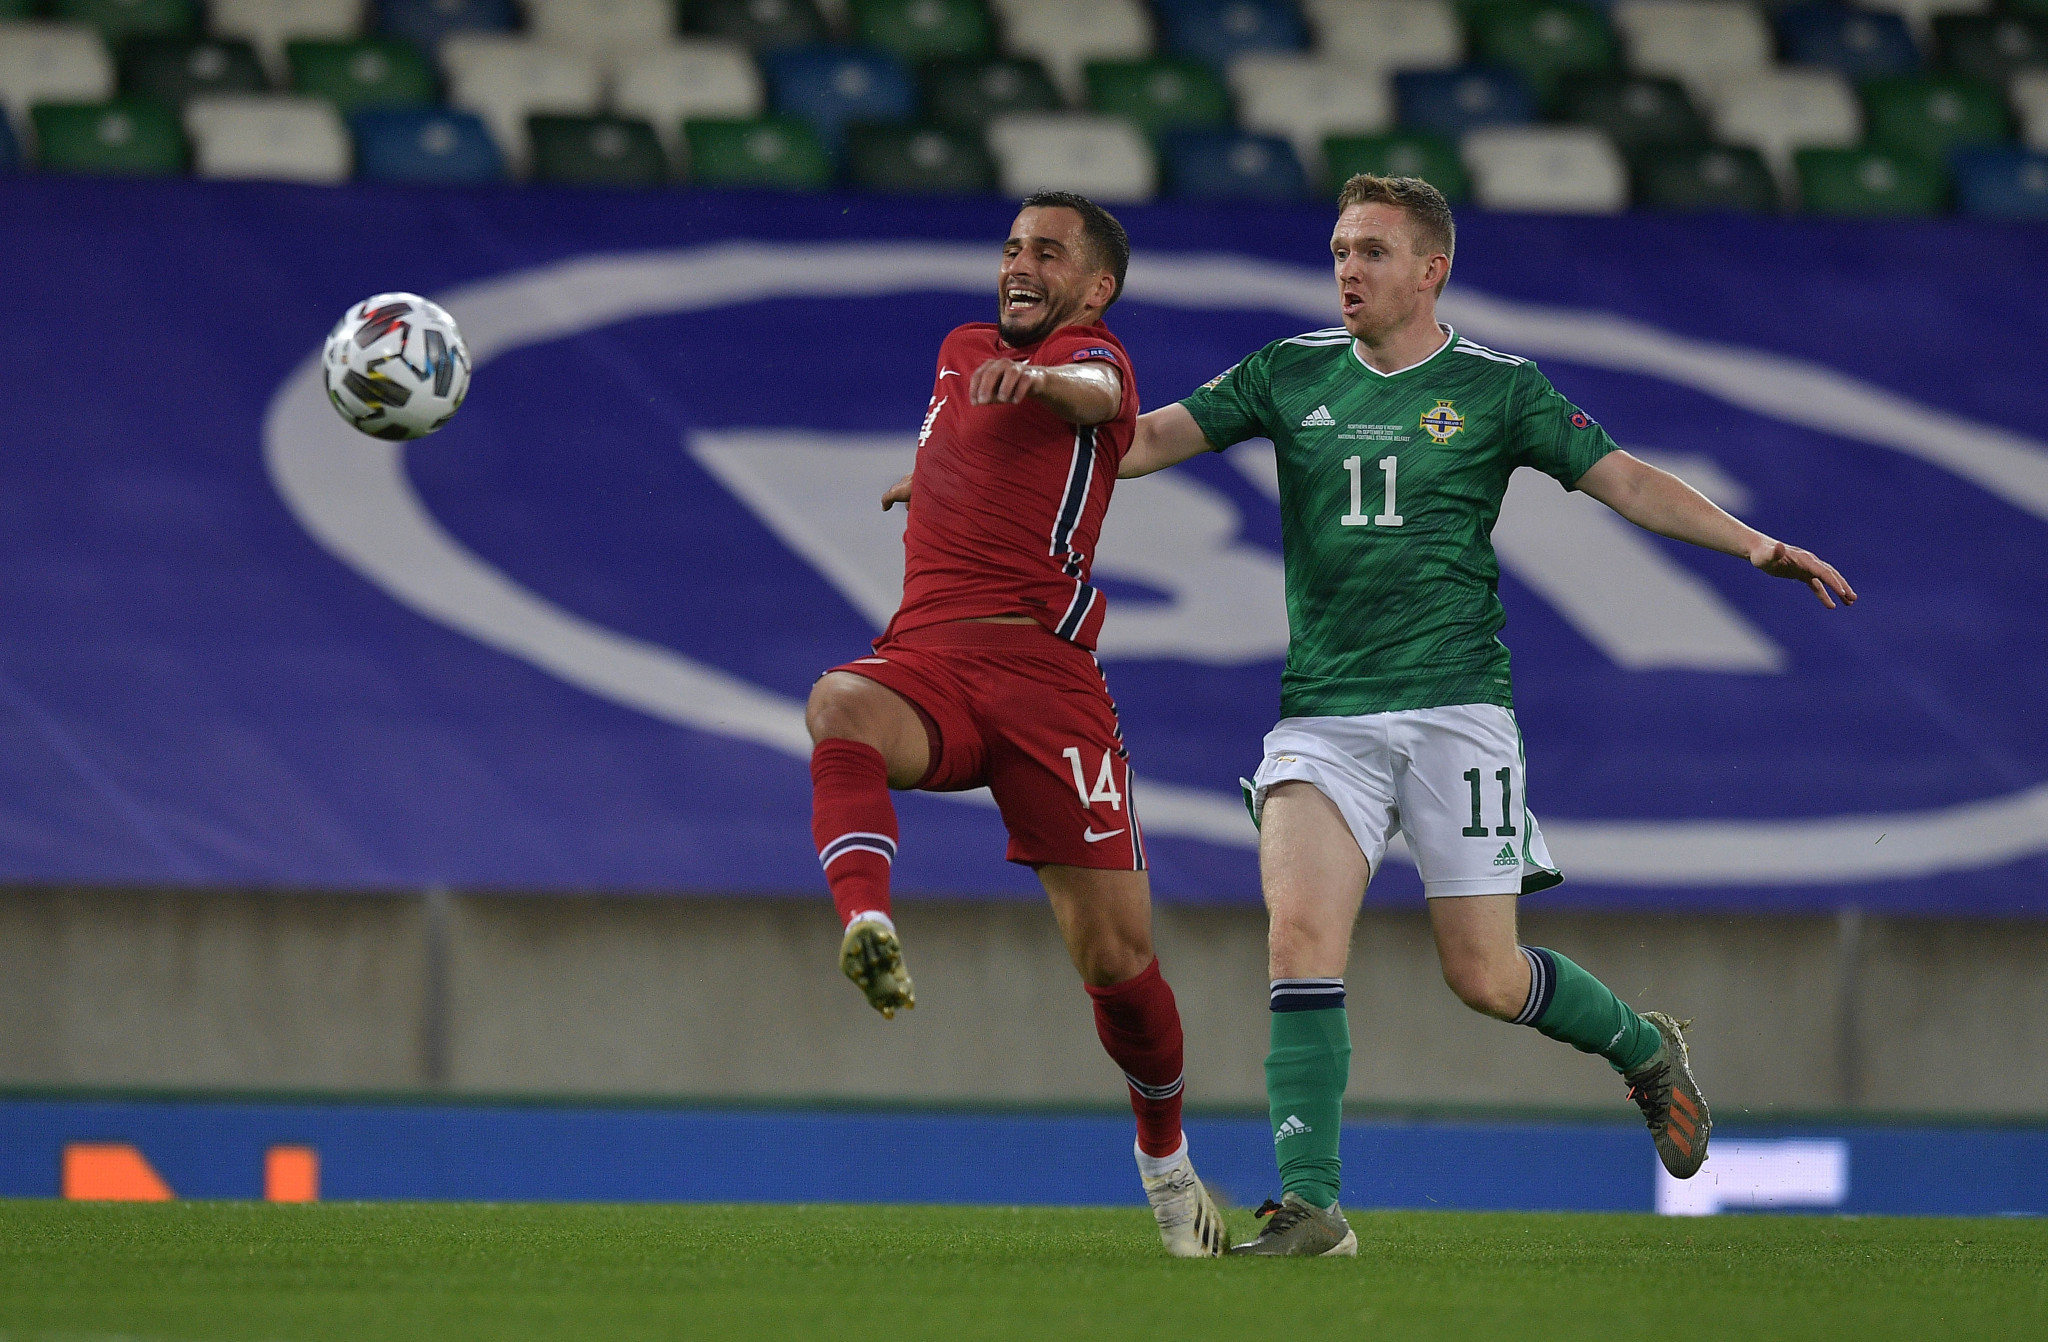 Omar Elabdellaoui contracted coronavirus and was isolated from the rest of Norway's squad, according to the NFF ©Getty Images